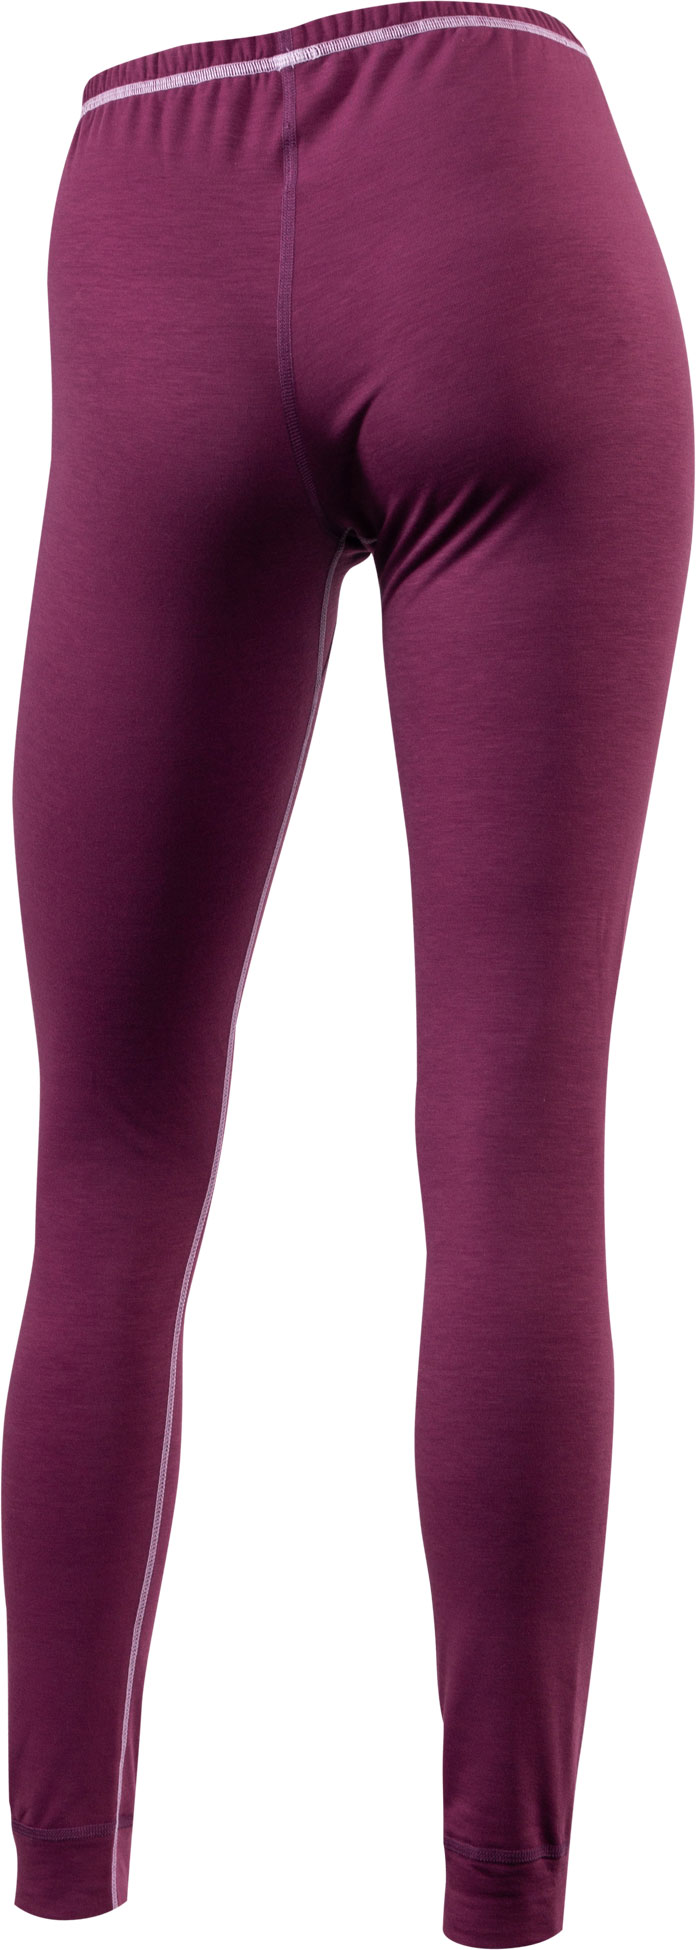 Women's functional base layer trousers